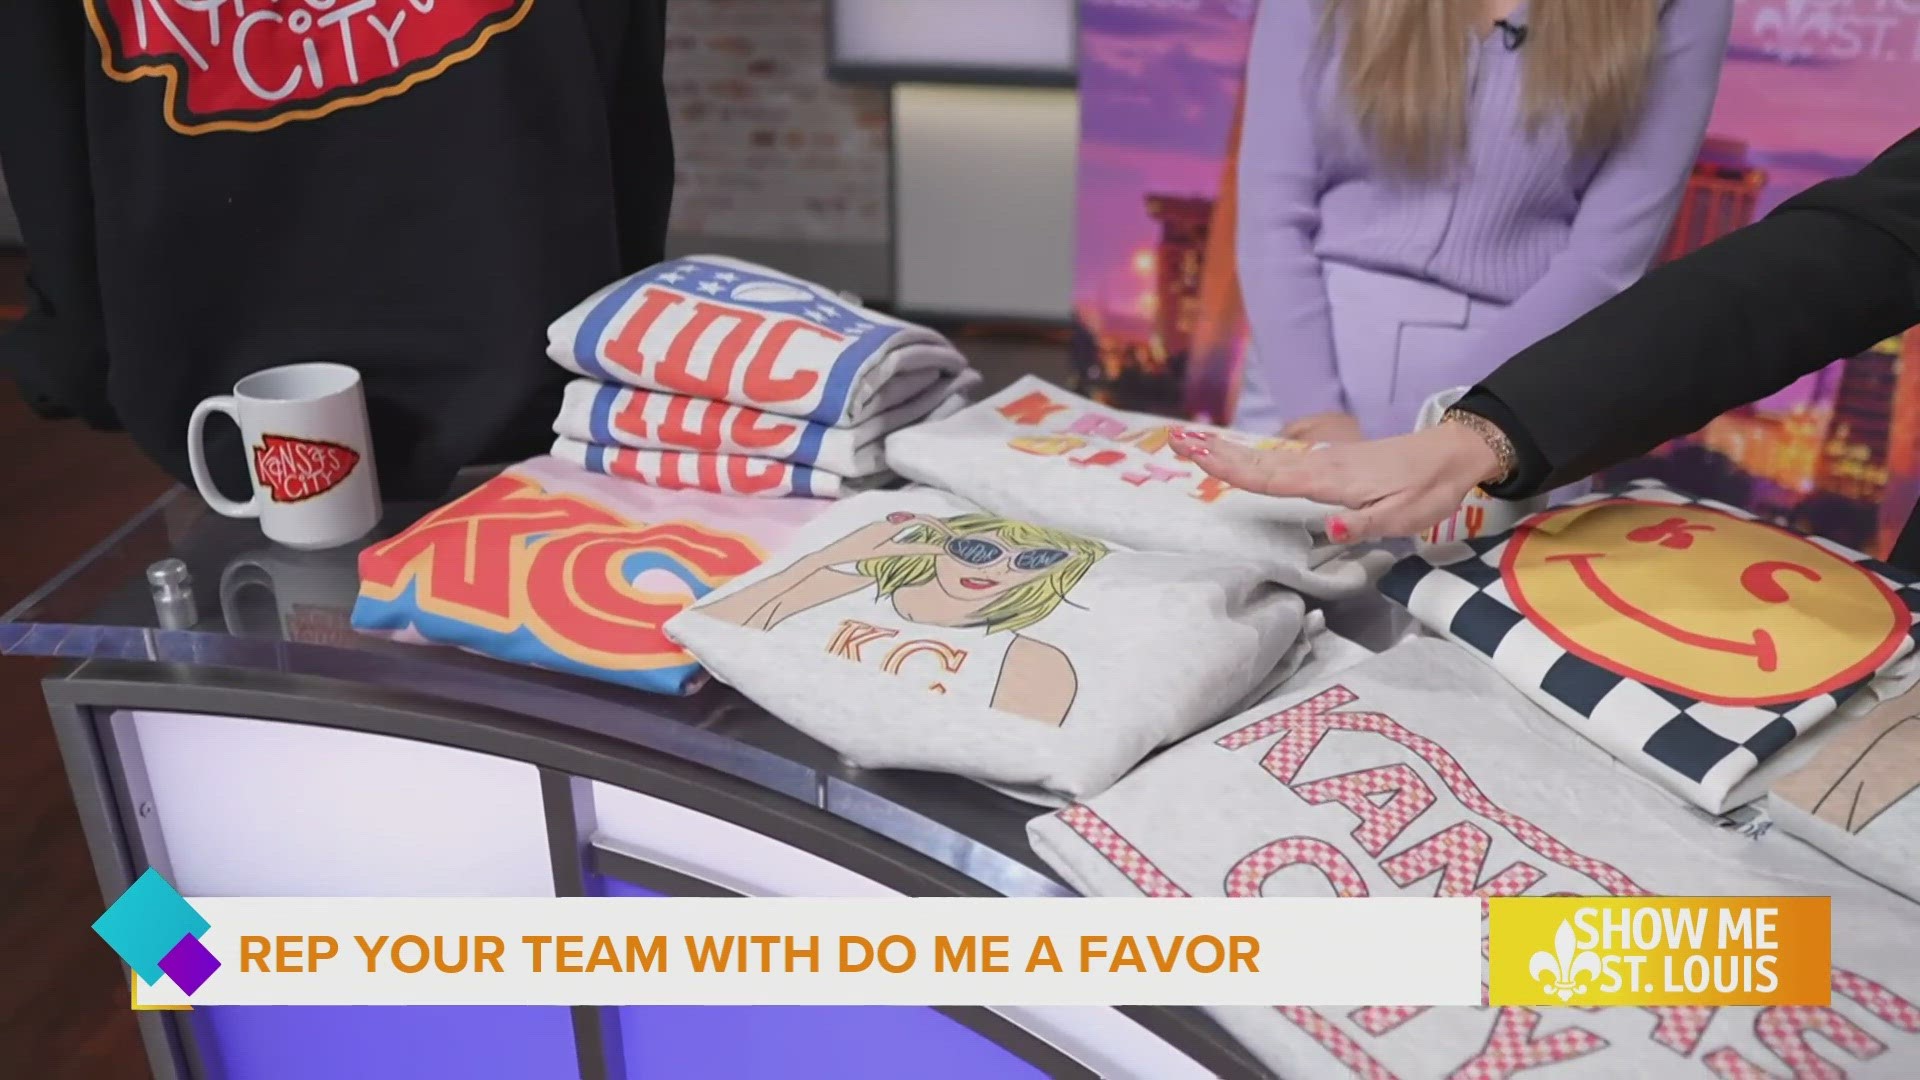 Get ready for America's biggest game by getting your Chiefs and Taylor Swift swag from Do Me A Favor STL.